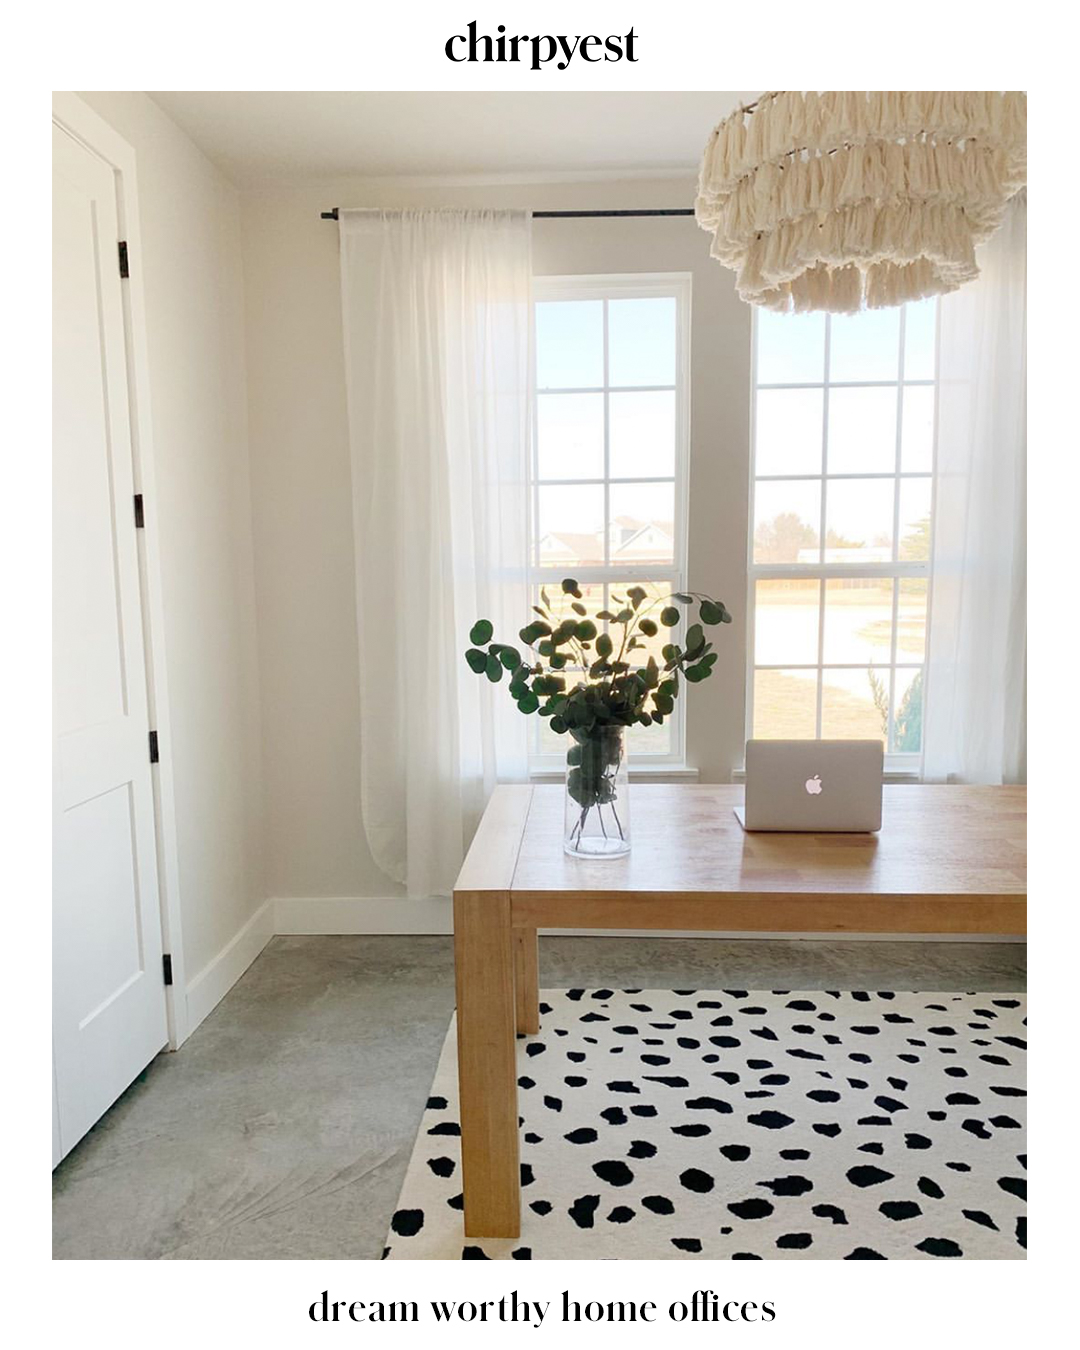 Dream Worthy Home offices minimal look with a black and white patterned rug